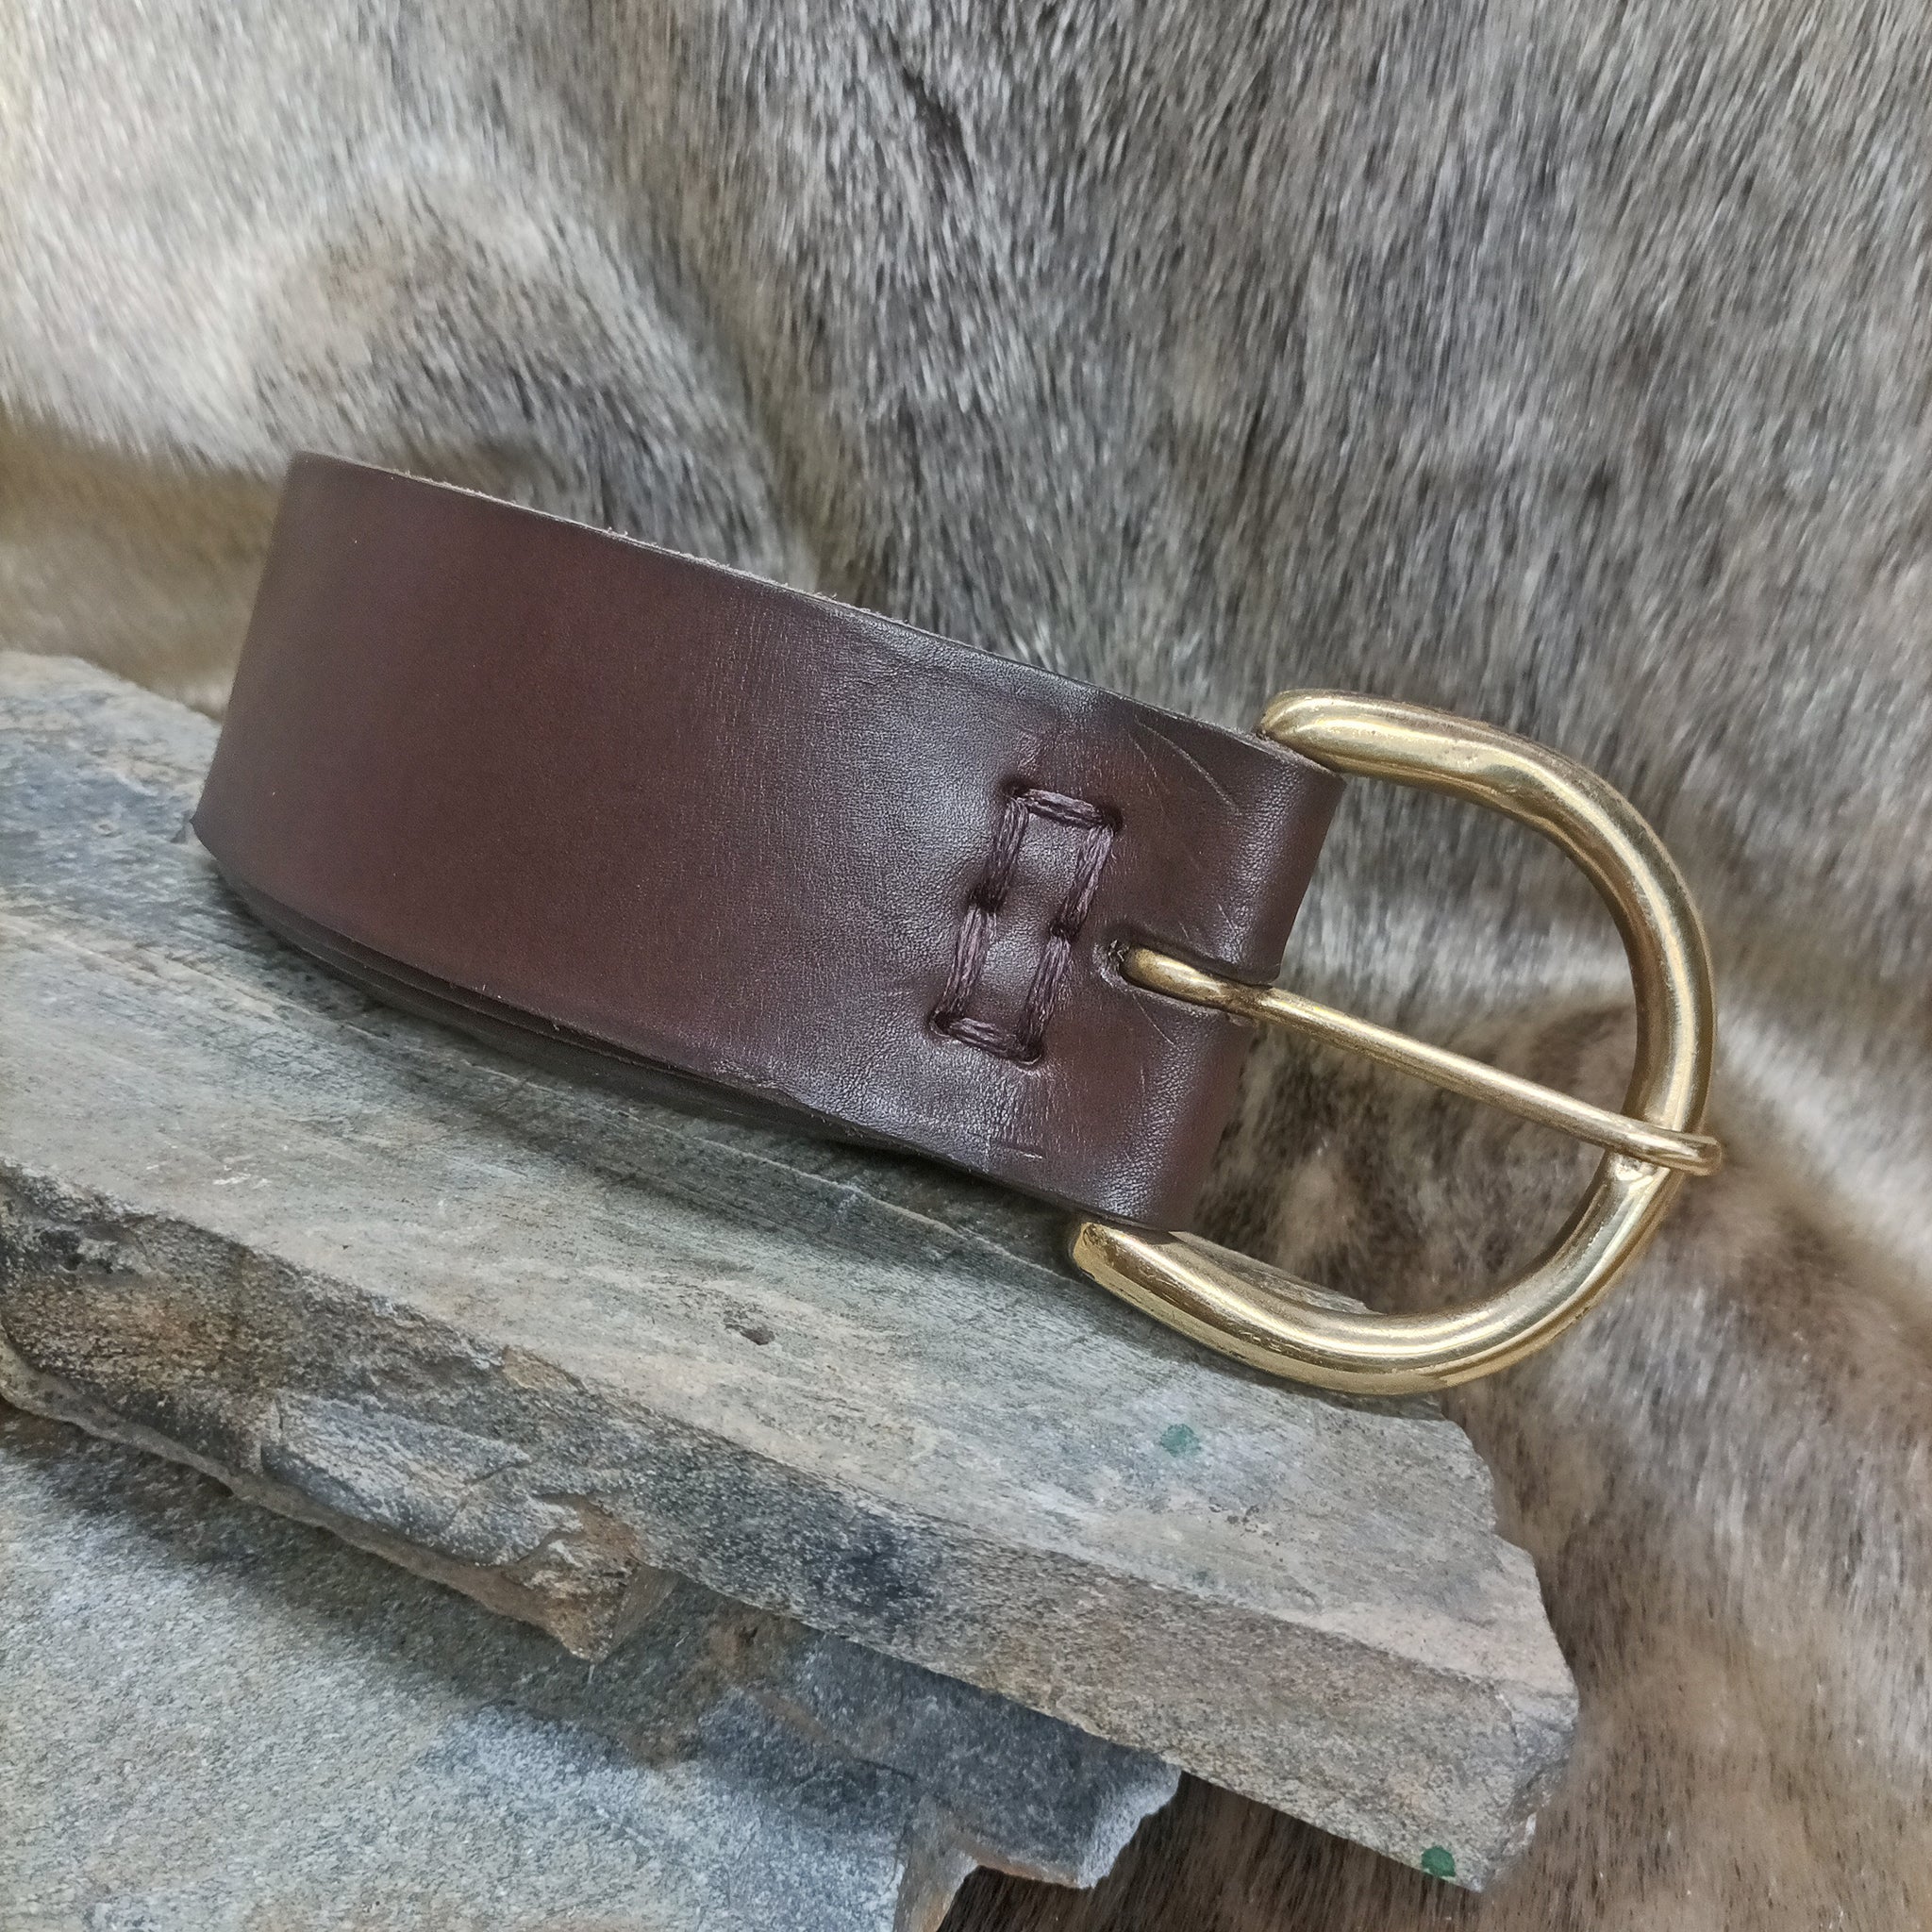 Leather Viking Belt with Brass Buckle - Viking Clothing Accessories